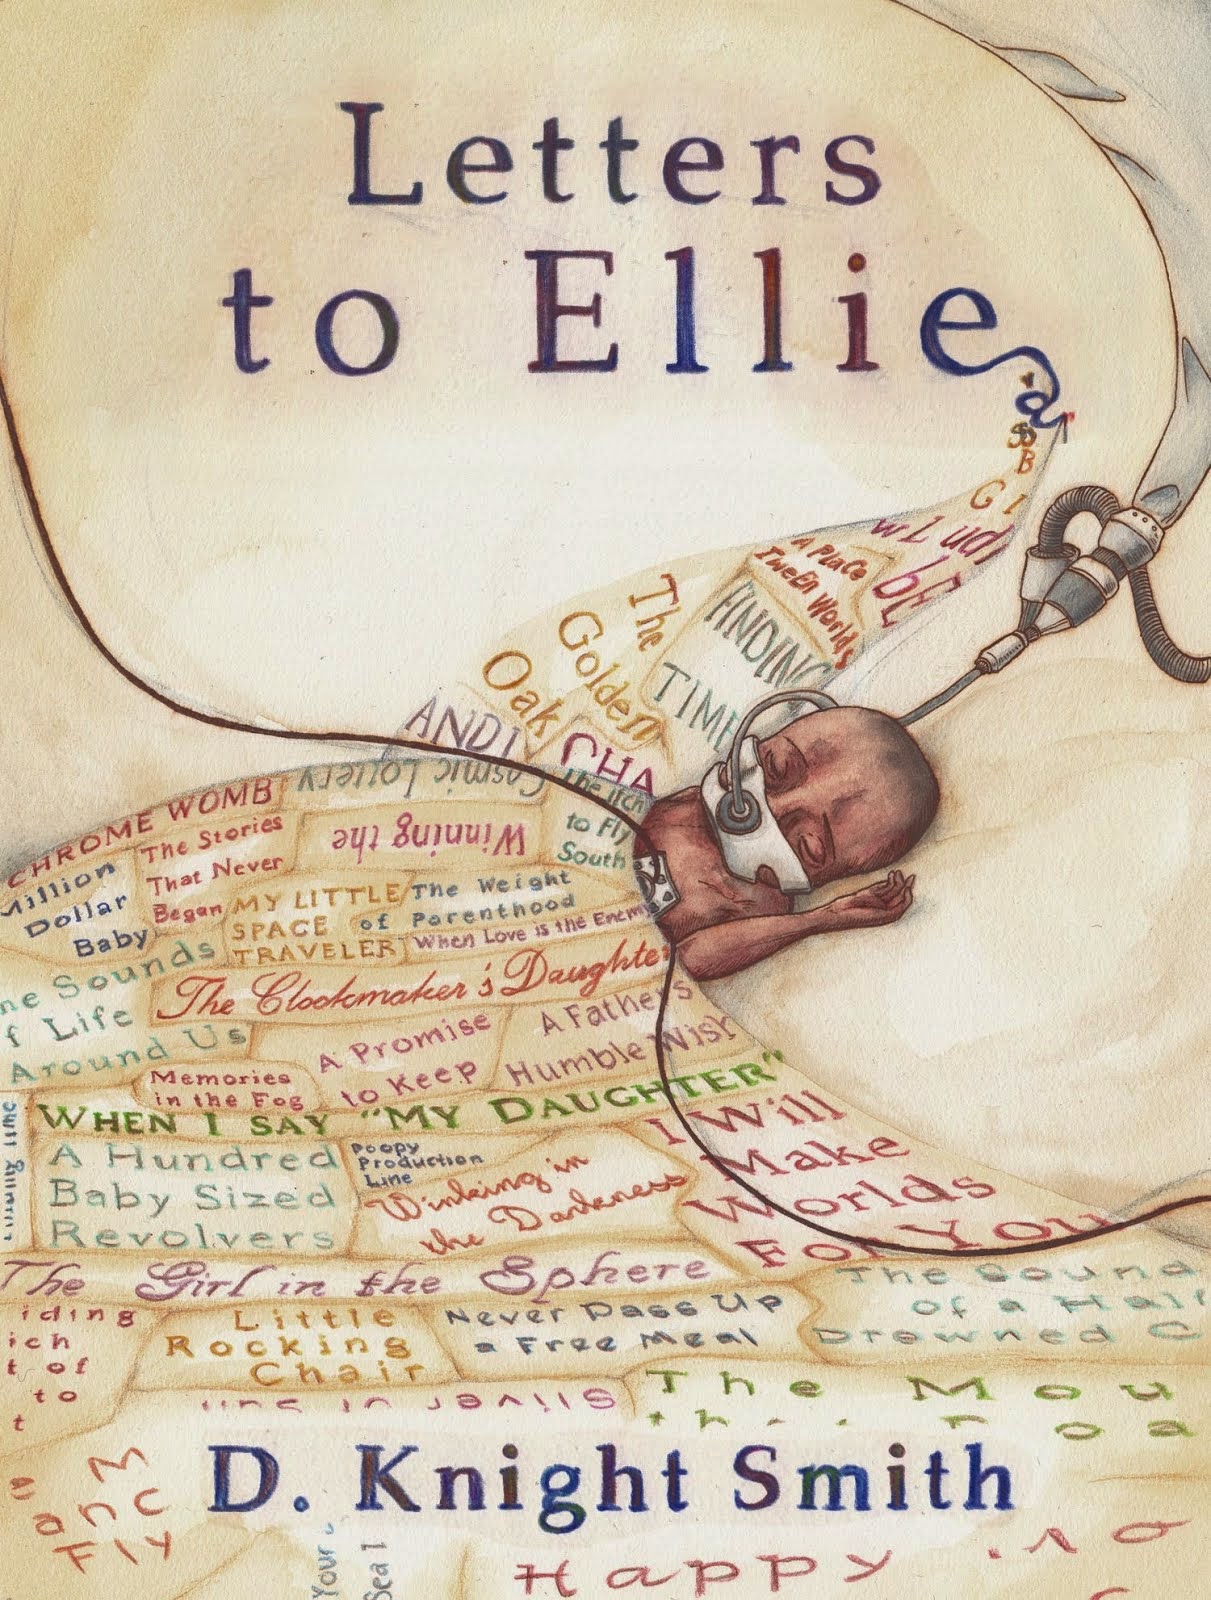 Letters to Ellie Book!